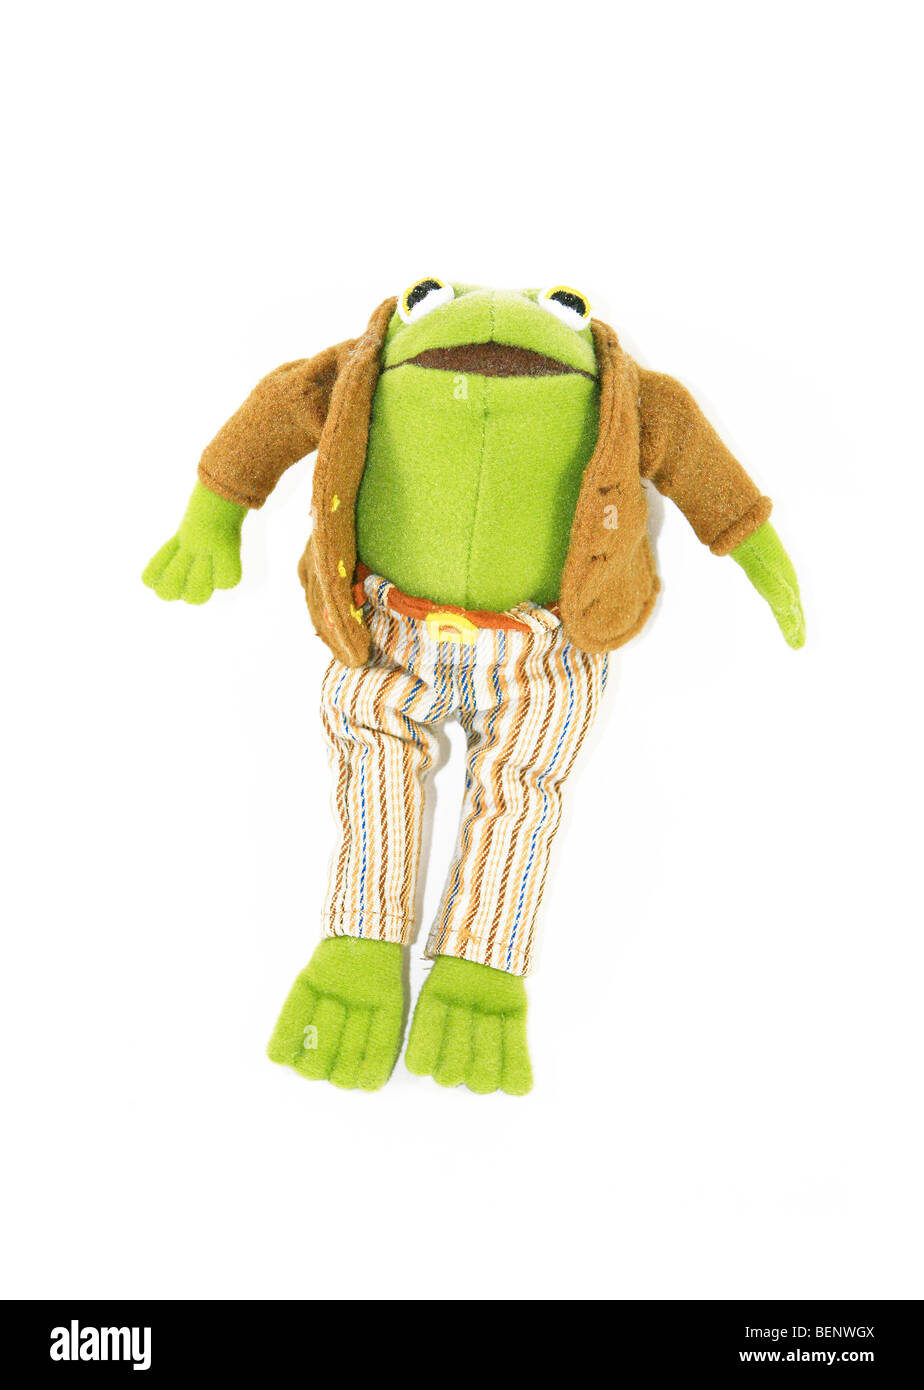 Mr. Toad, stuffed, soft toy frog, based on the popular children's book series 'Frog and Toad' by American author Arnold Lobel. Stock Photo